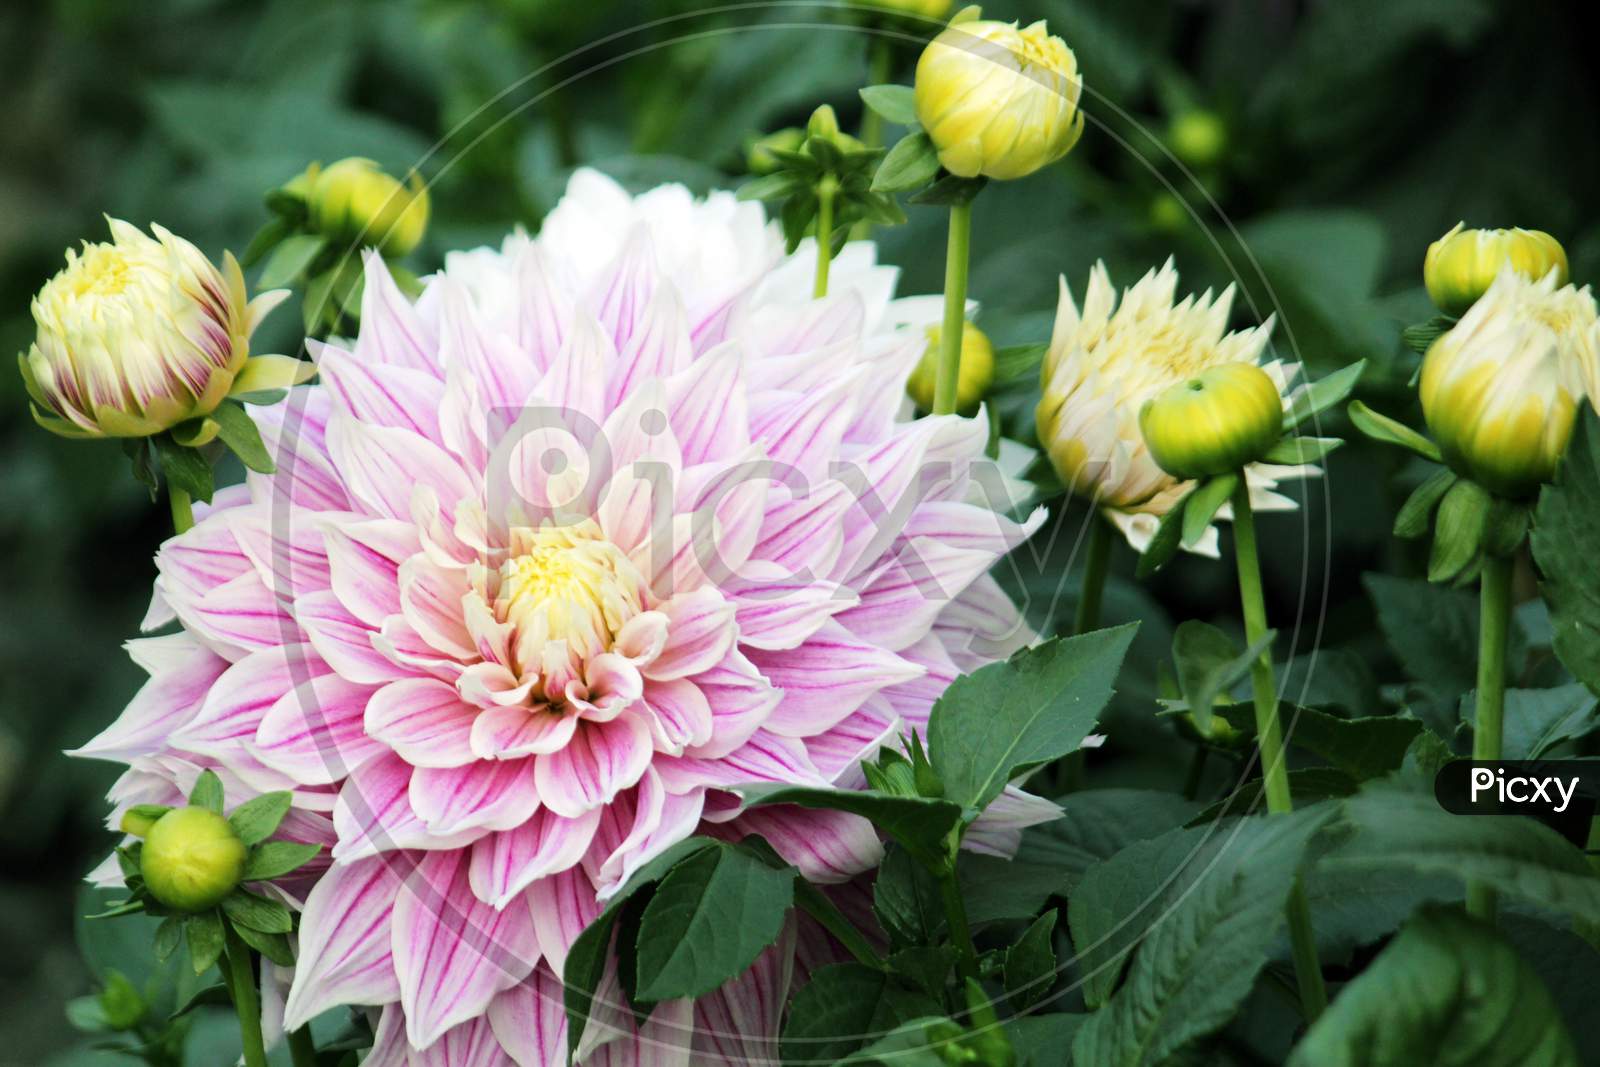 Purple White colored Dahlia flower blooming with green nature around on a bright day.